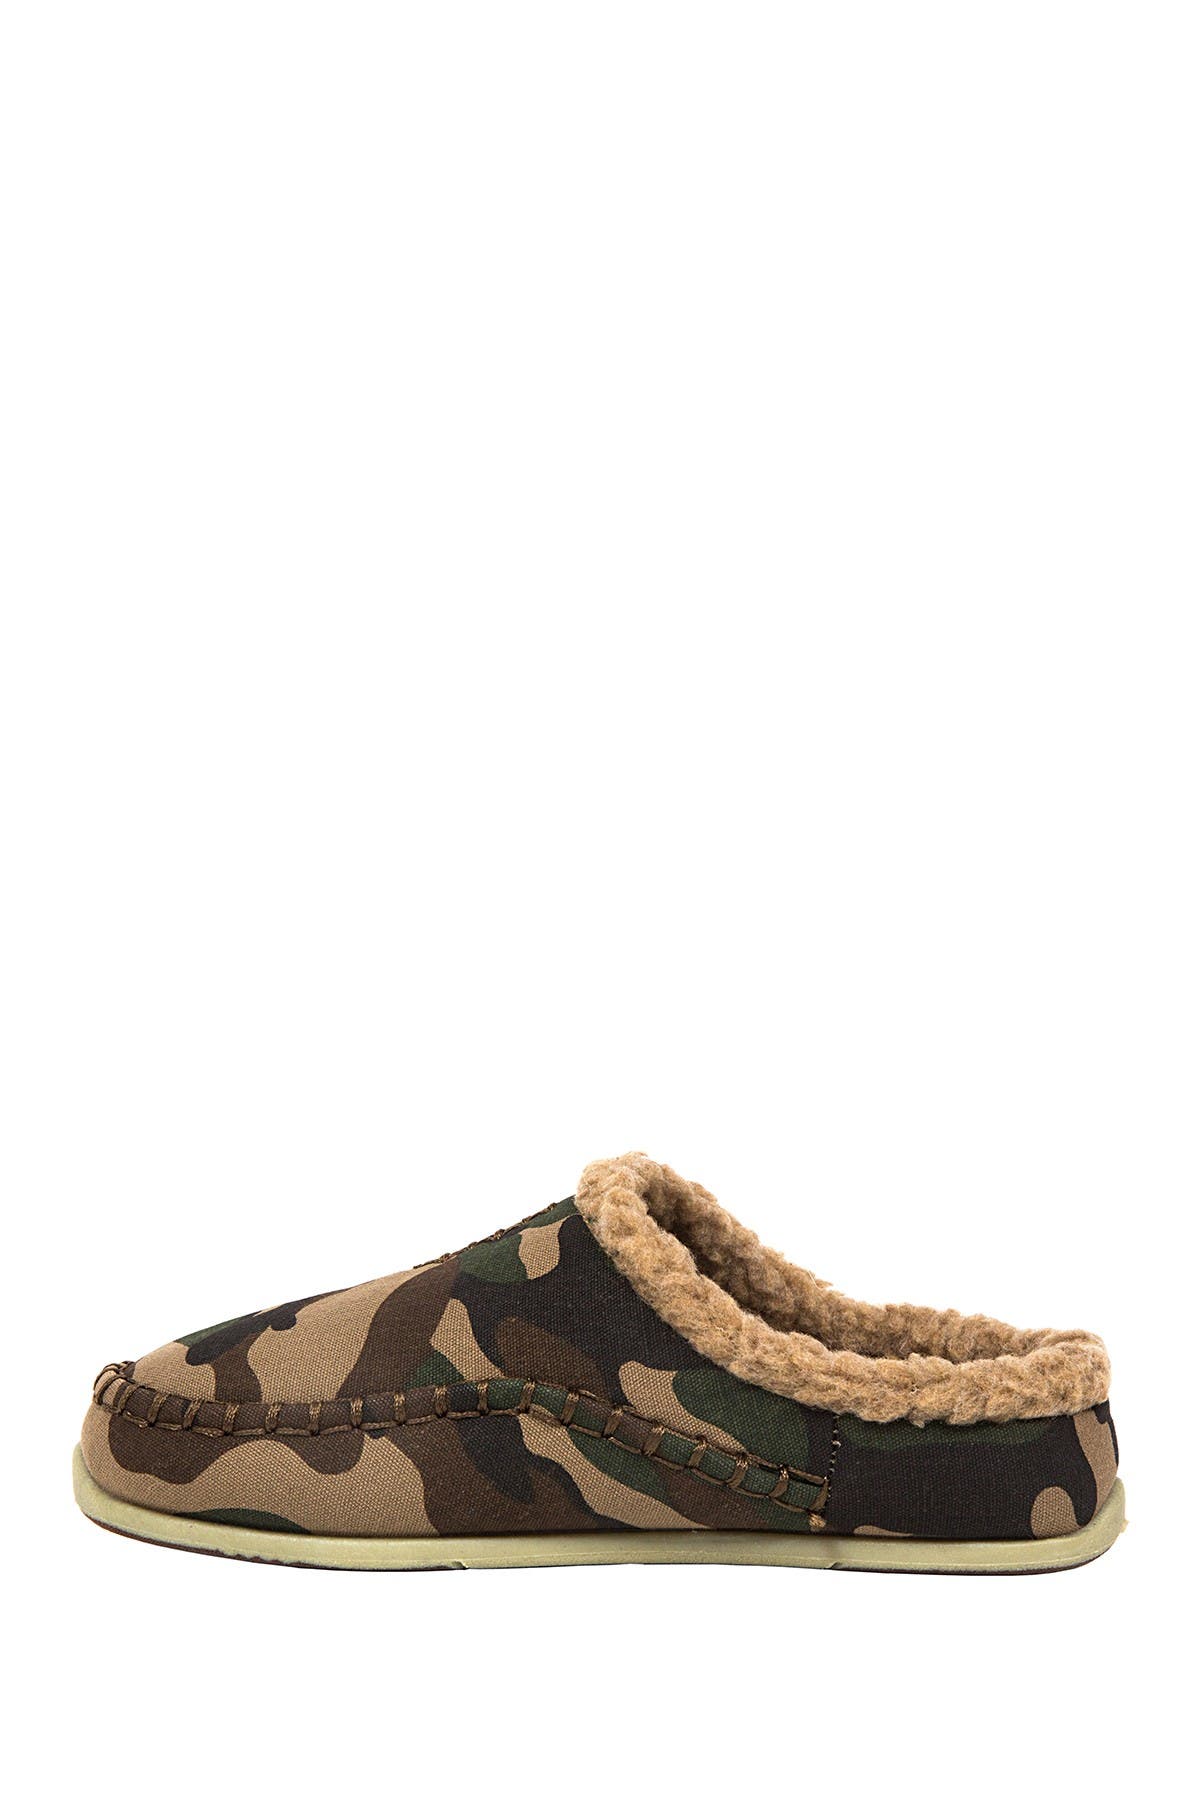 Deer Stags Kids' Slipperooz Lil' Nordic Faux Shearling Lined Camouflage Slippers In Dark Grey4